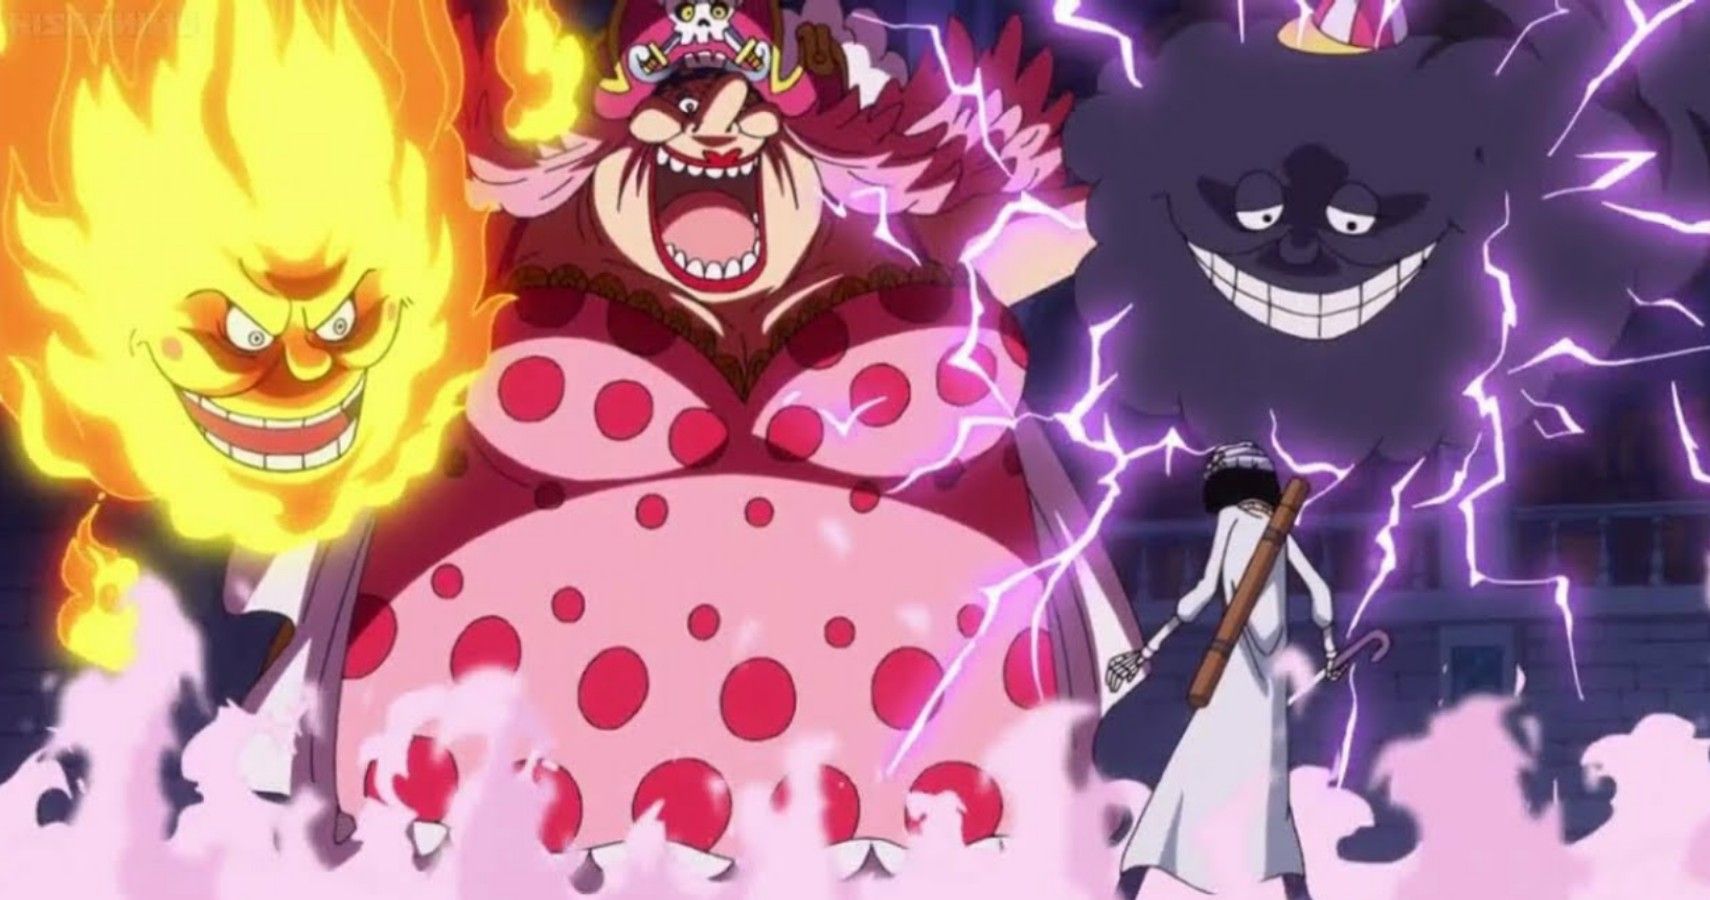 Big Mom is physically the strongest Yonko, so why do people